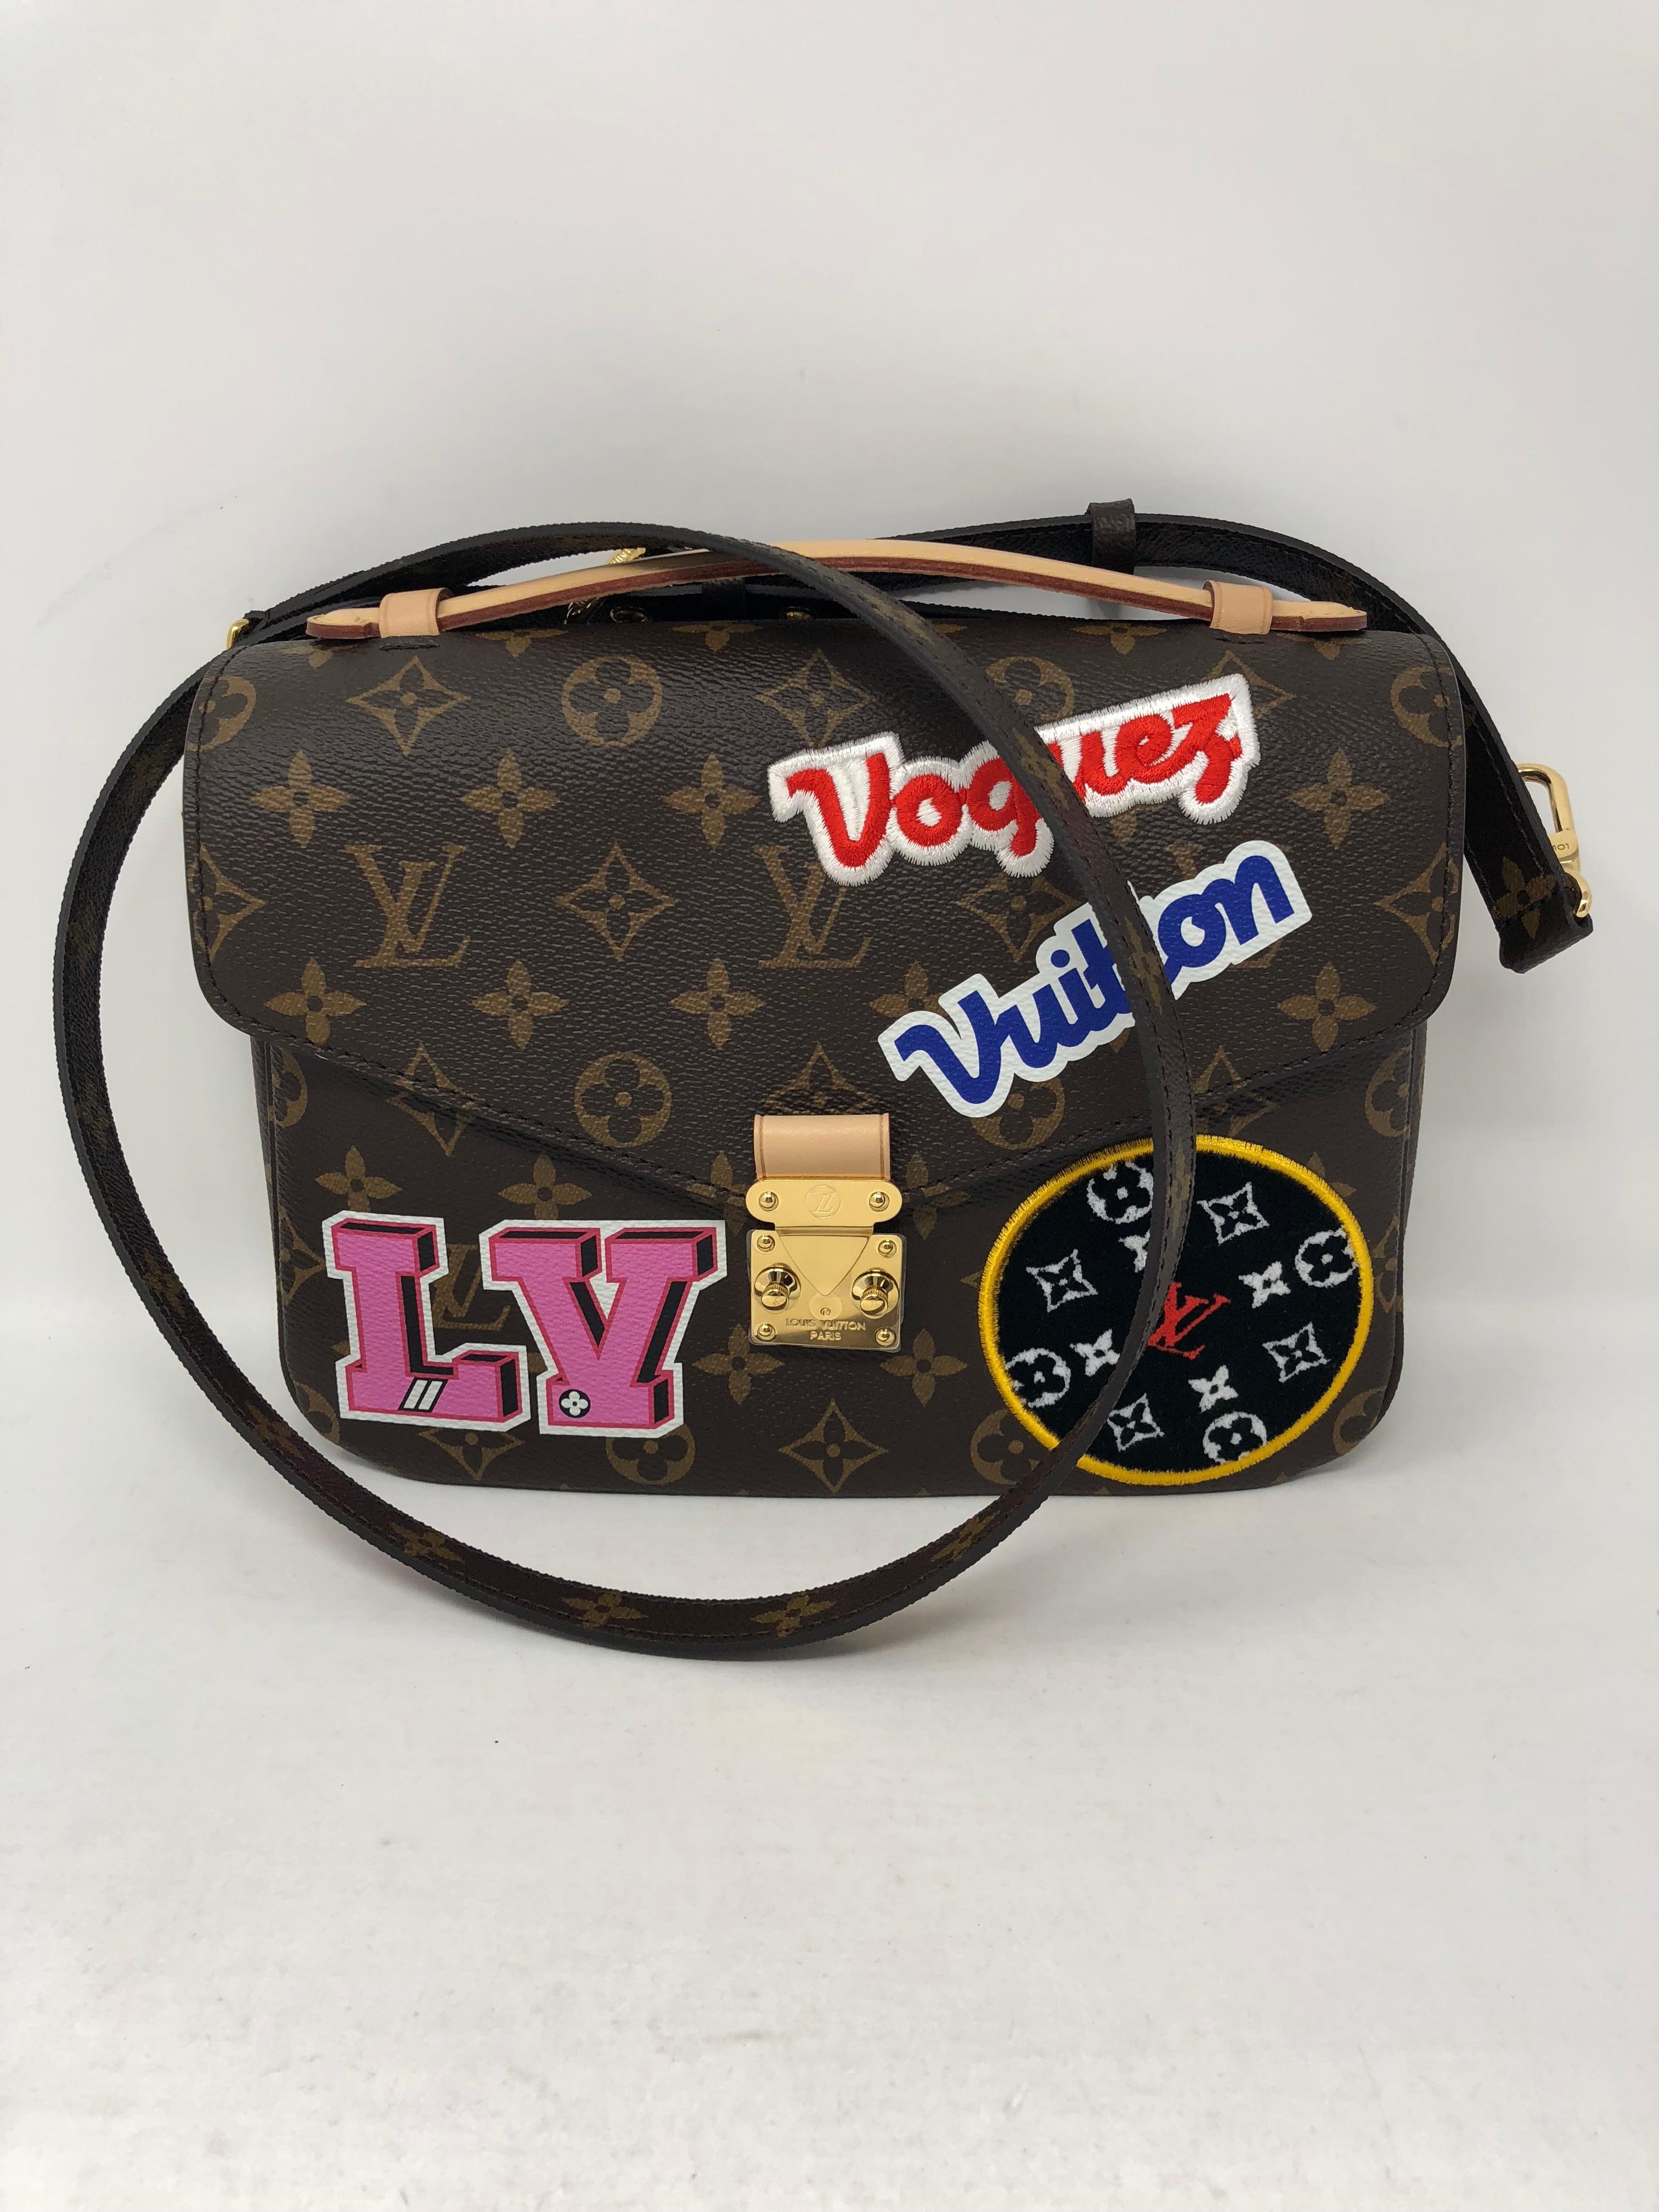 Louis Vuitton Pochette Metis Monogram Travel Patches in brown monogram. Limited Edition and sold out at LV. Brand new and never used. Great style crossbody or shoulder bag. Hard to find Metis style from LV. Cool patches sewn in and embroidered on